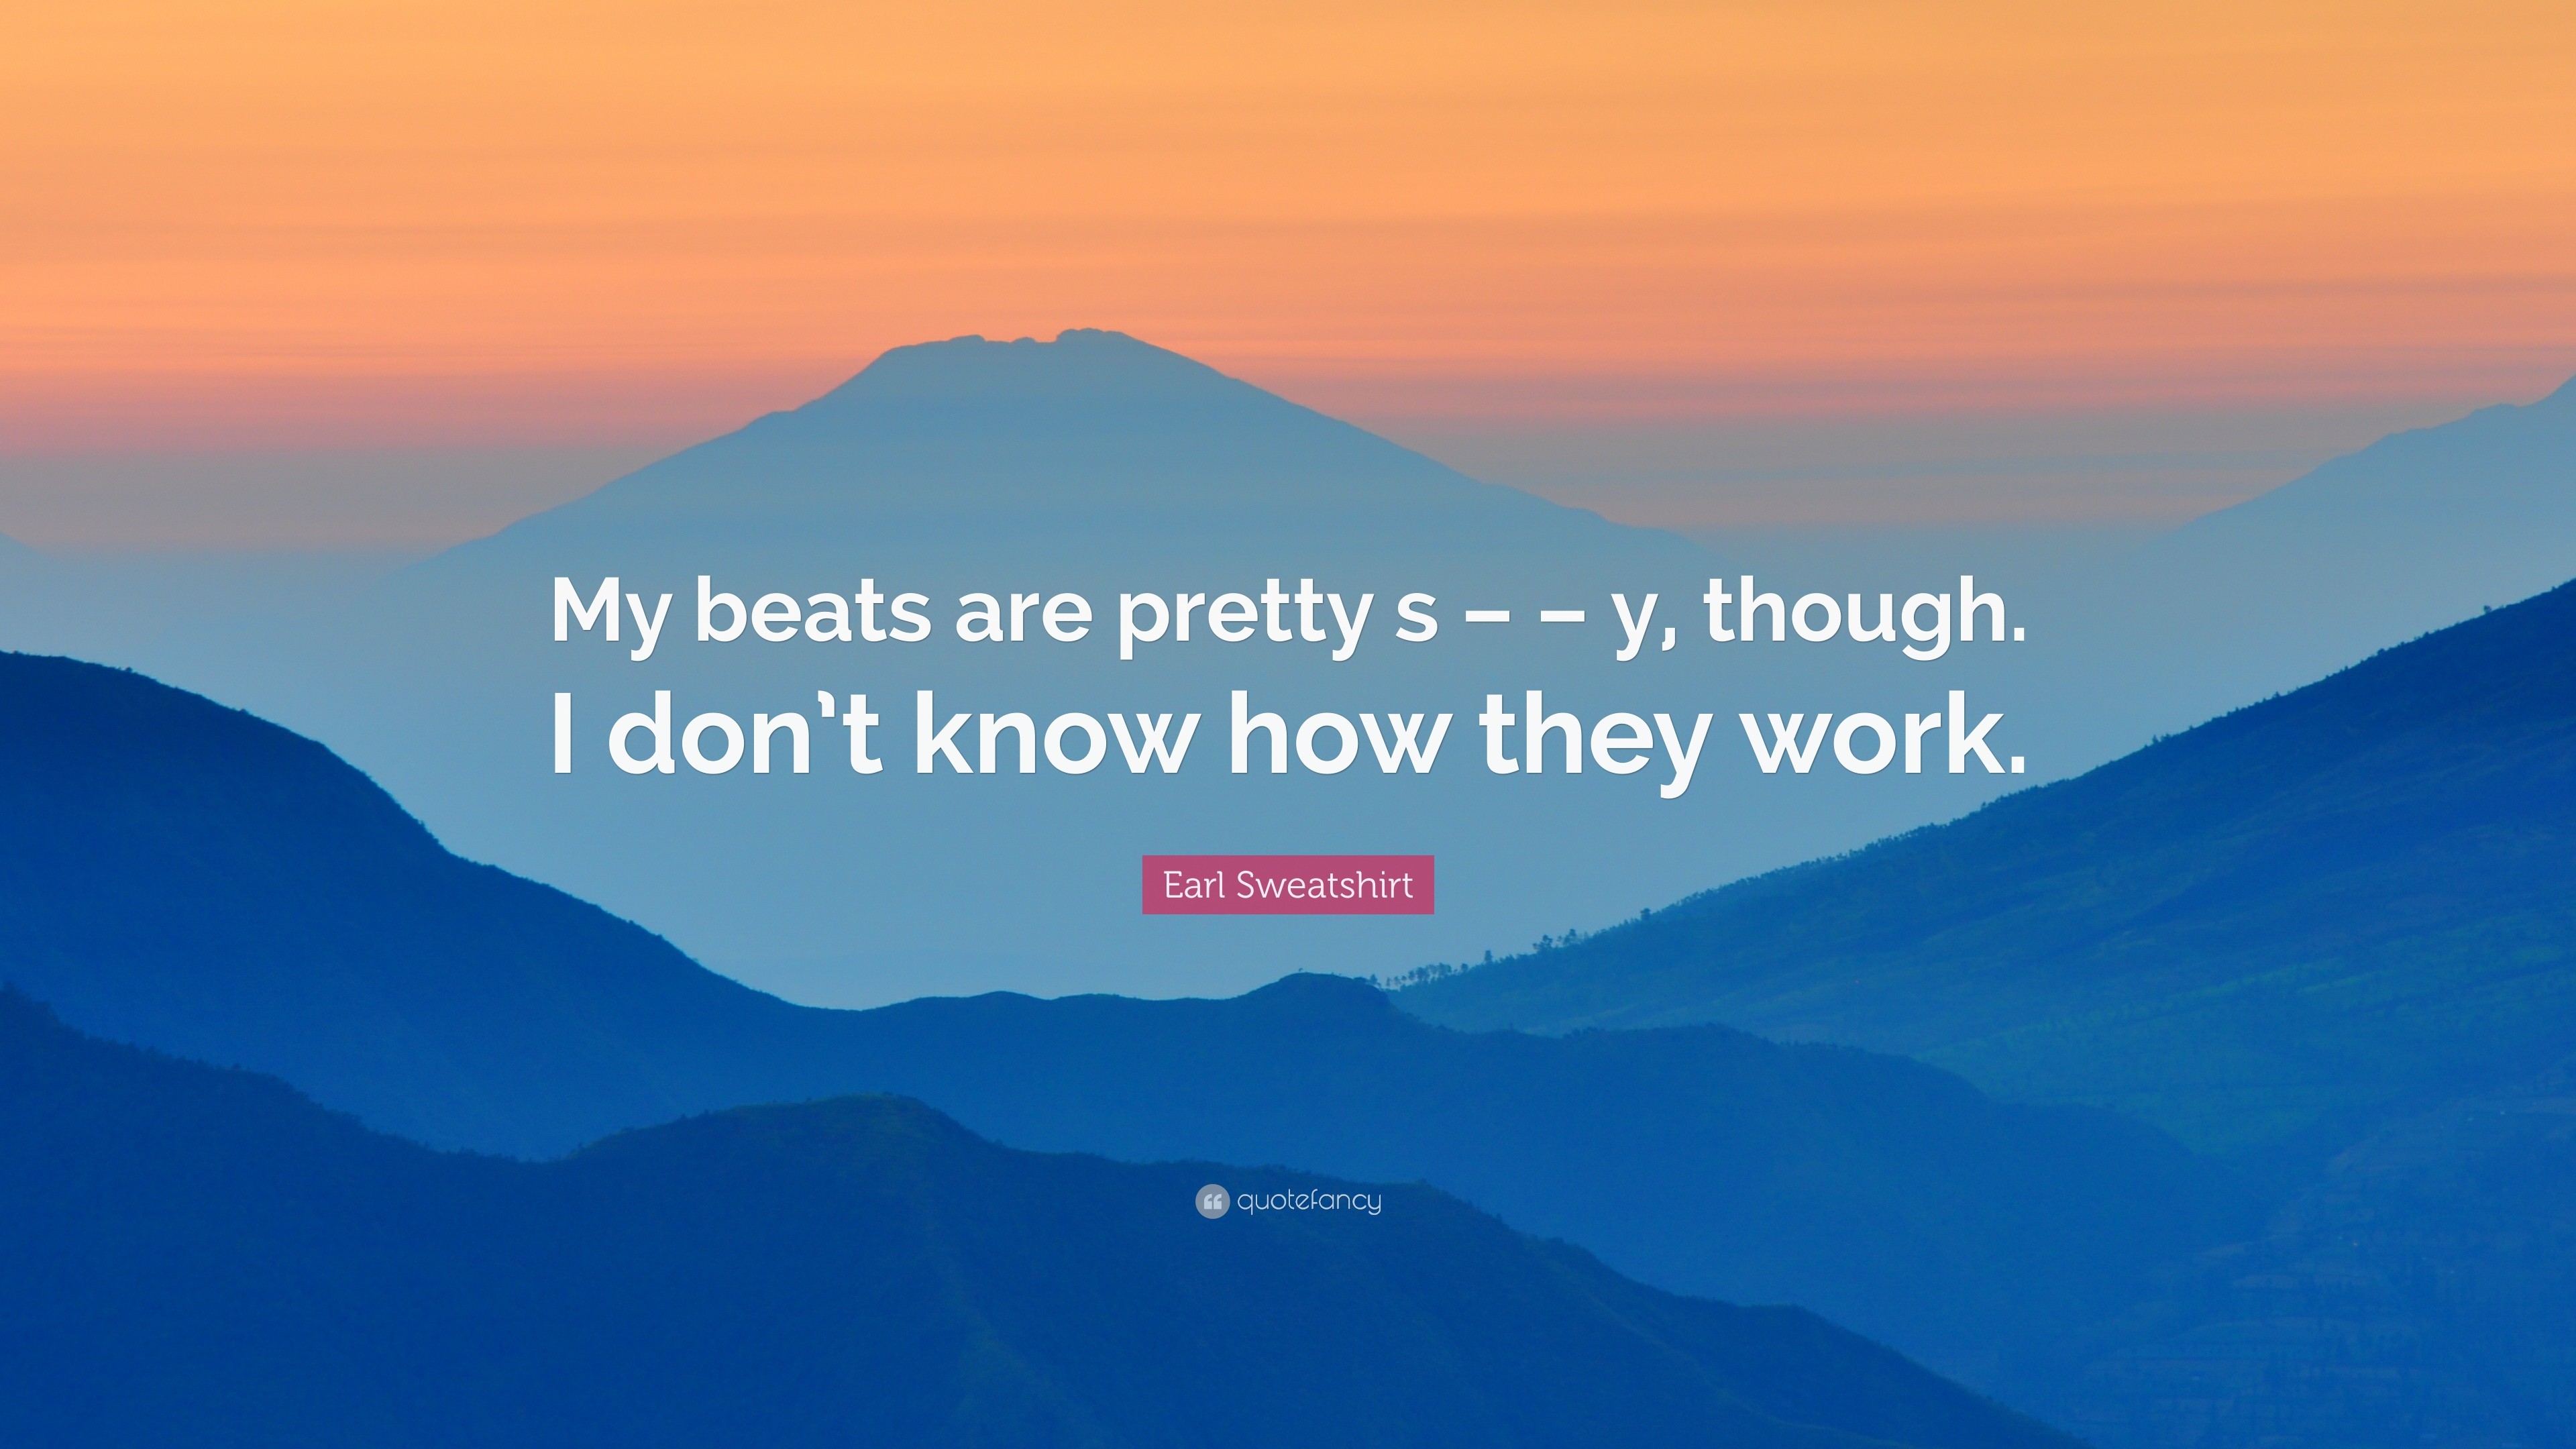 3840x2160 Earl Sweatshirt Quote: “My beats are pretty s – – y, though.